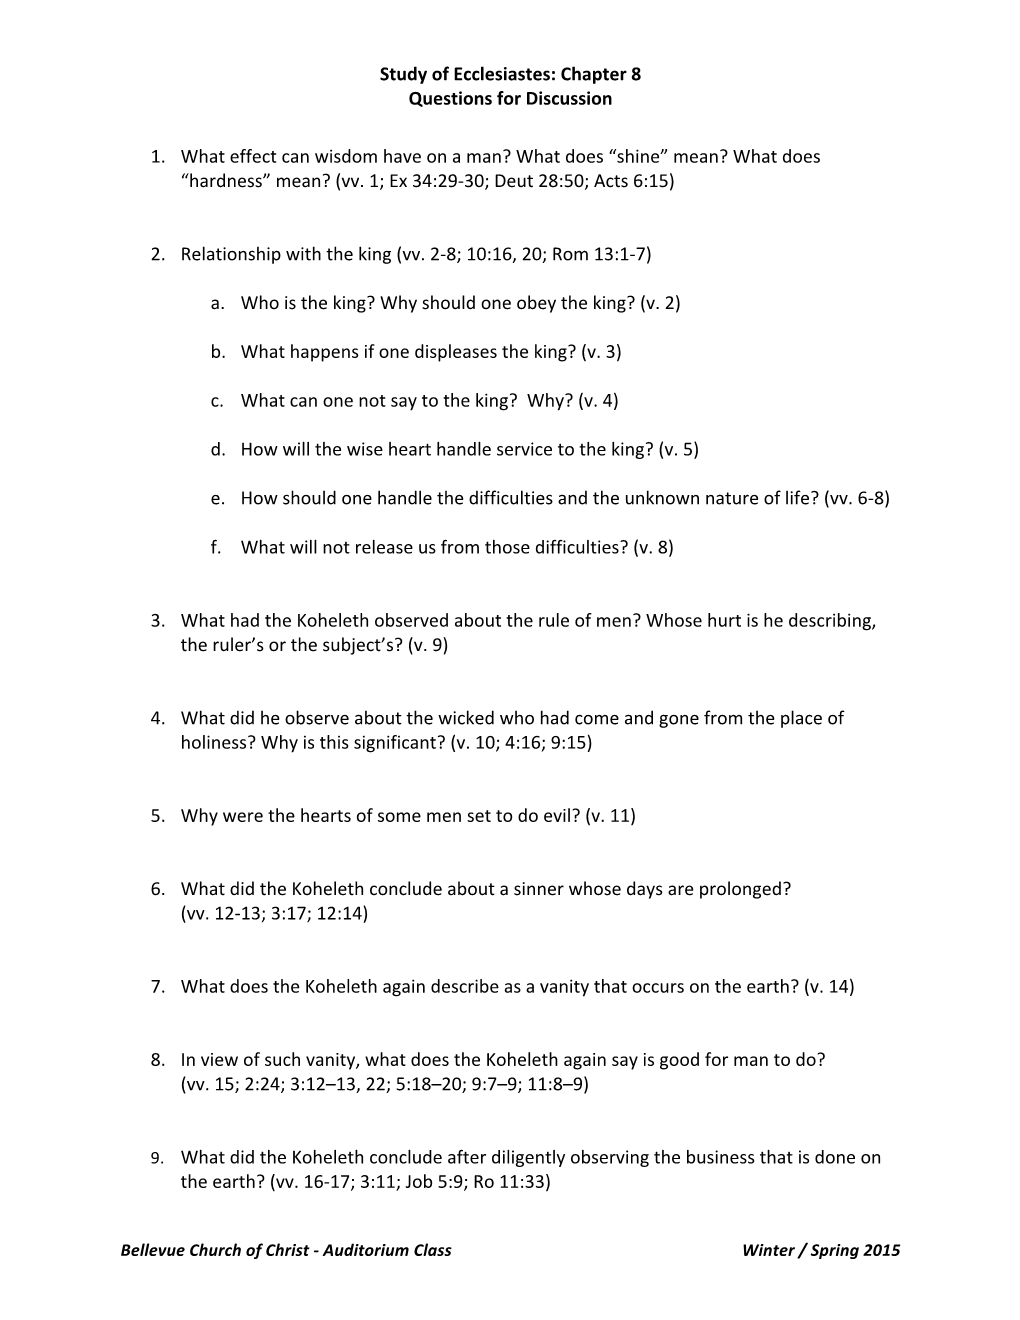 Study of Ecclesiastes: Chapter 8 Questions for Discussion